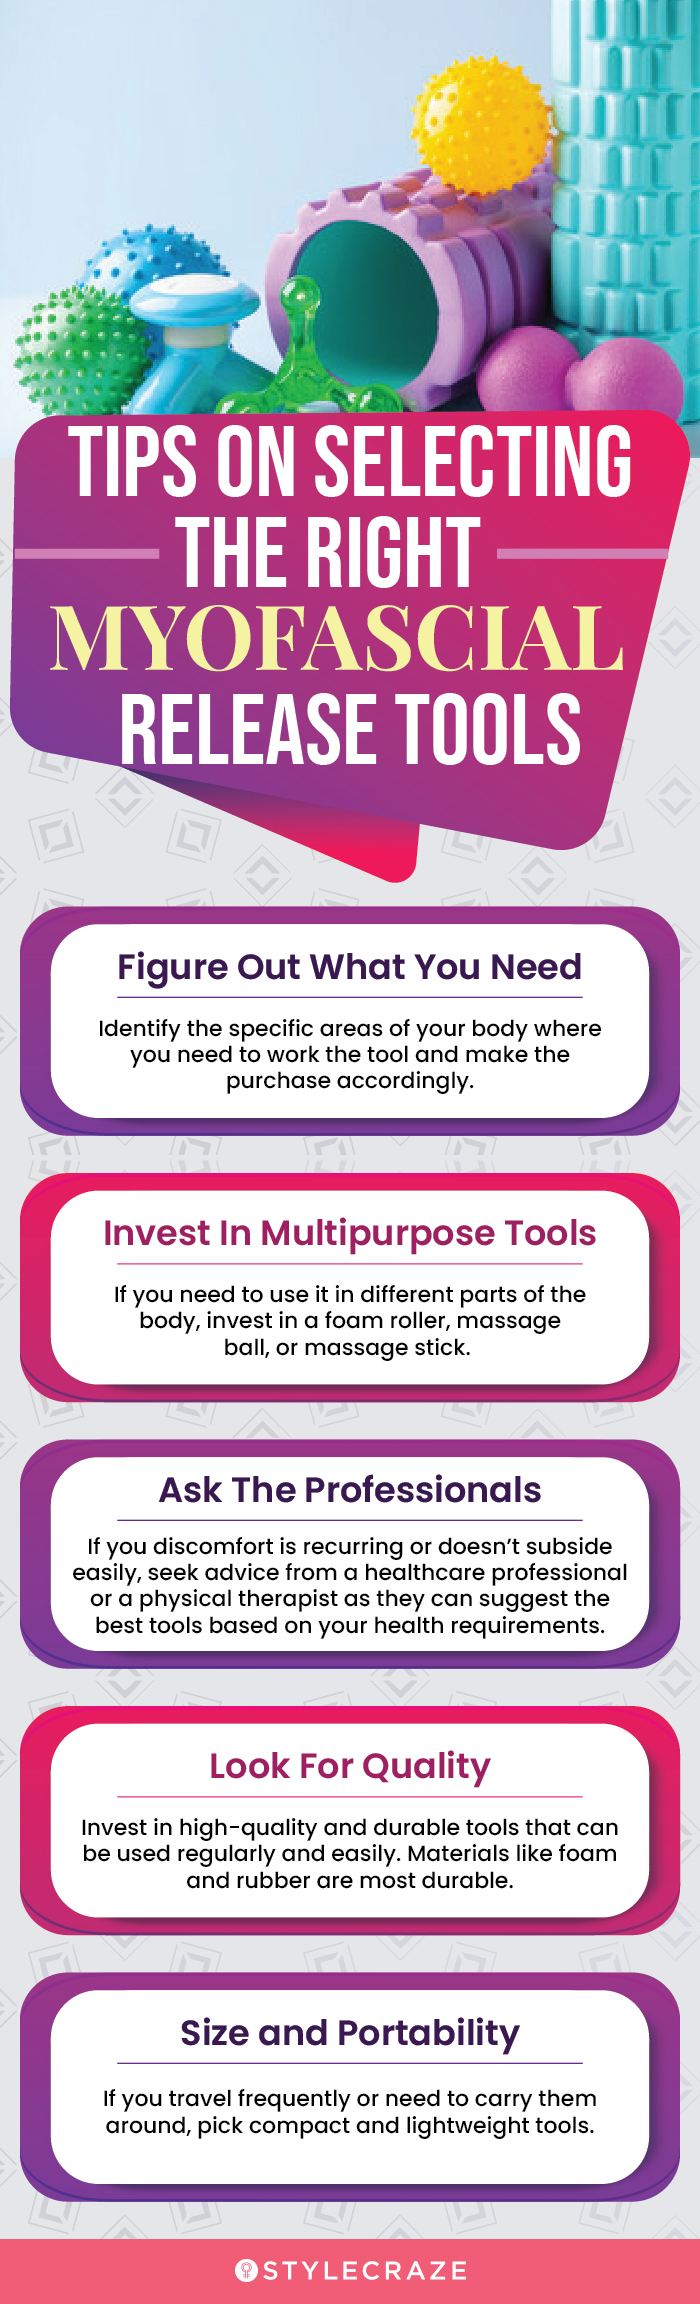 Tips On Selecting The Right Myofascial Release Tools (infographic)